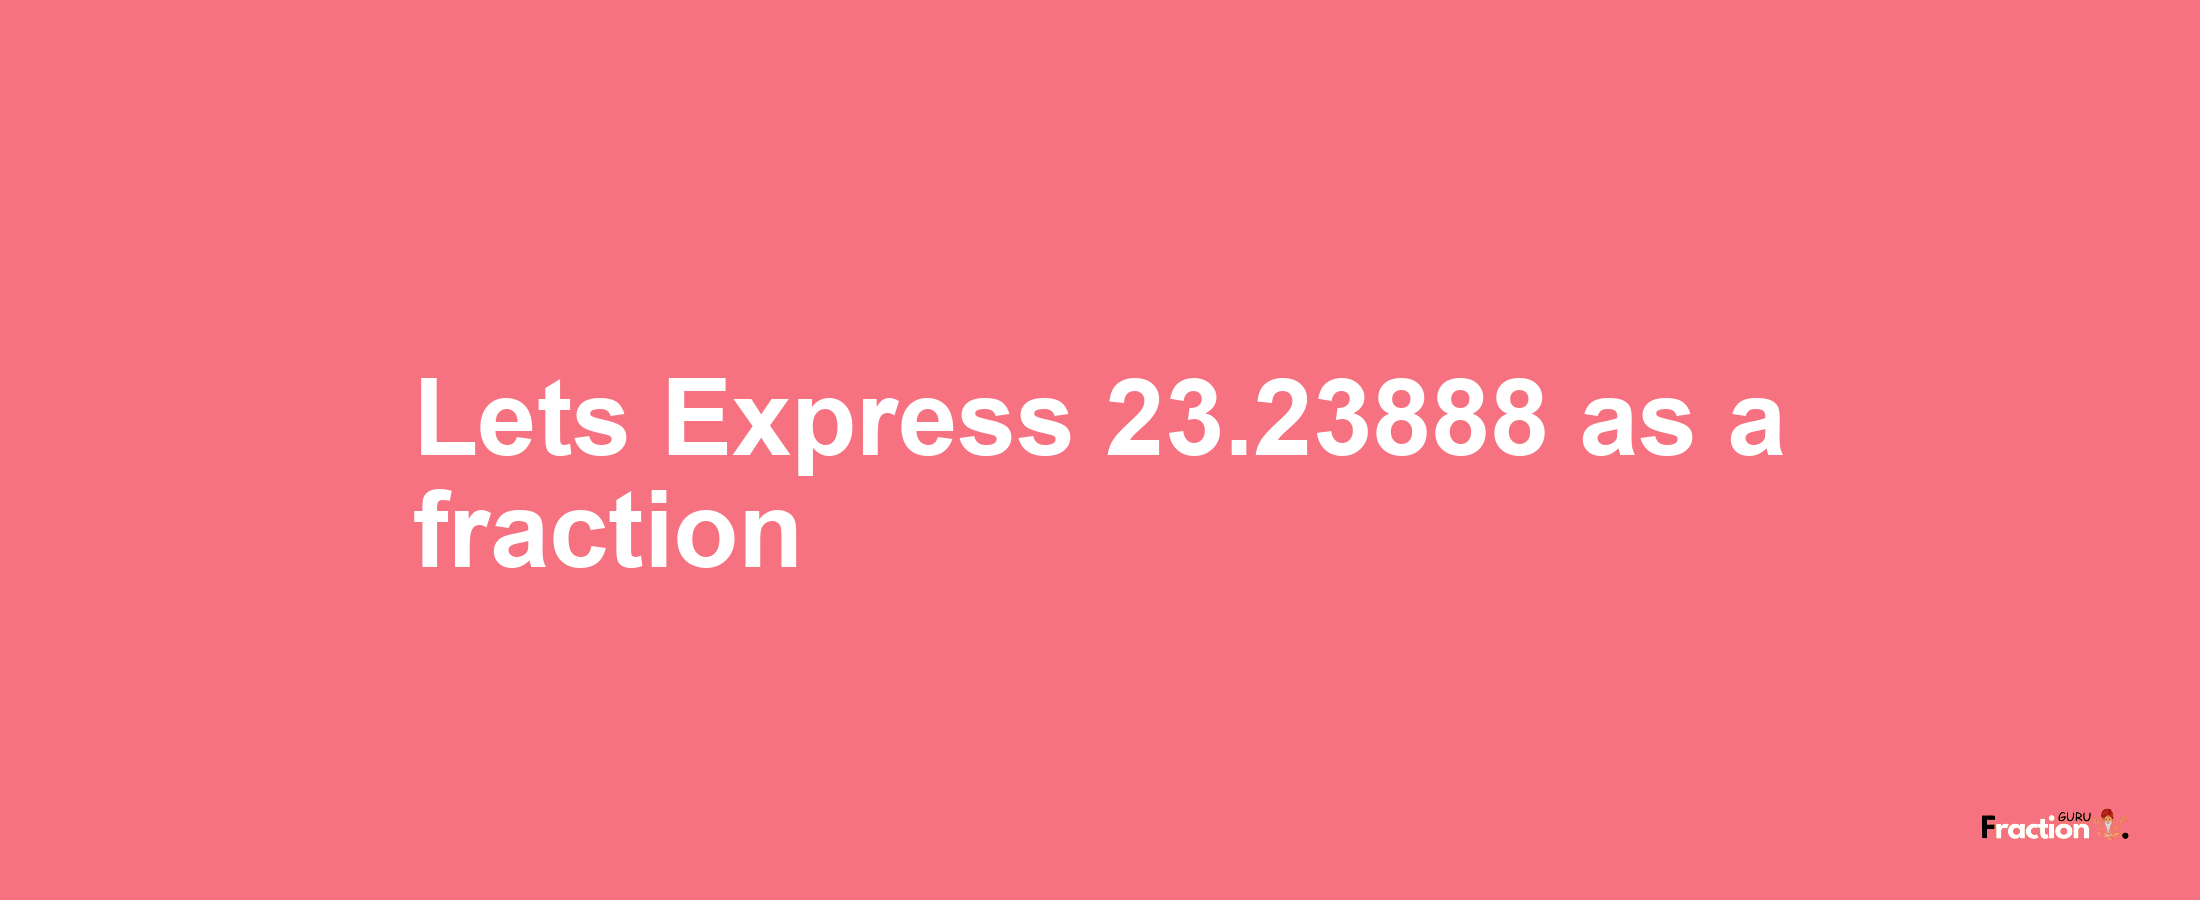 Lets Express 23.23888 as afraction